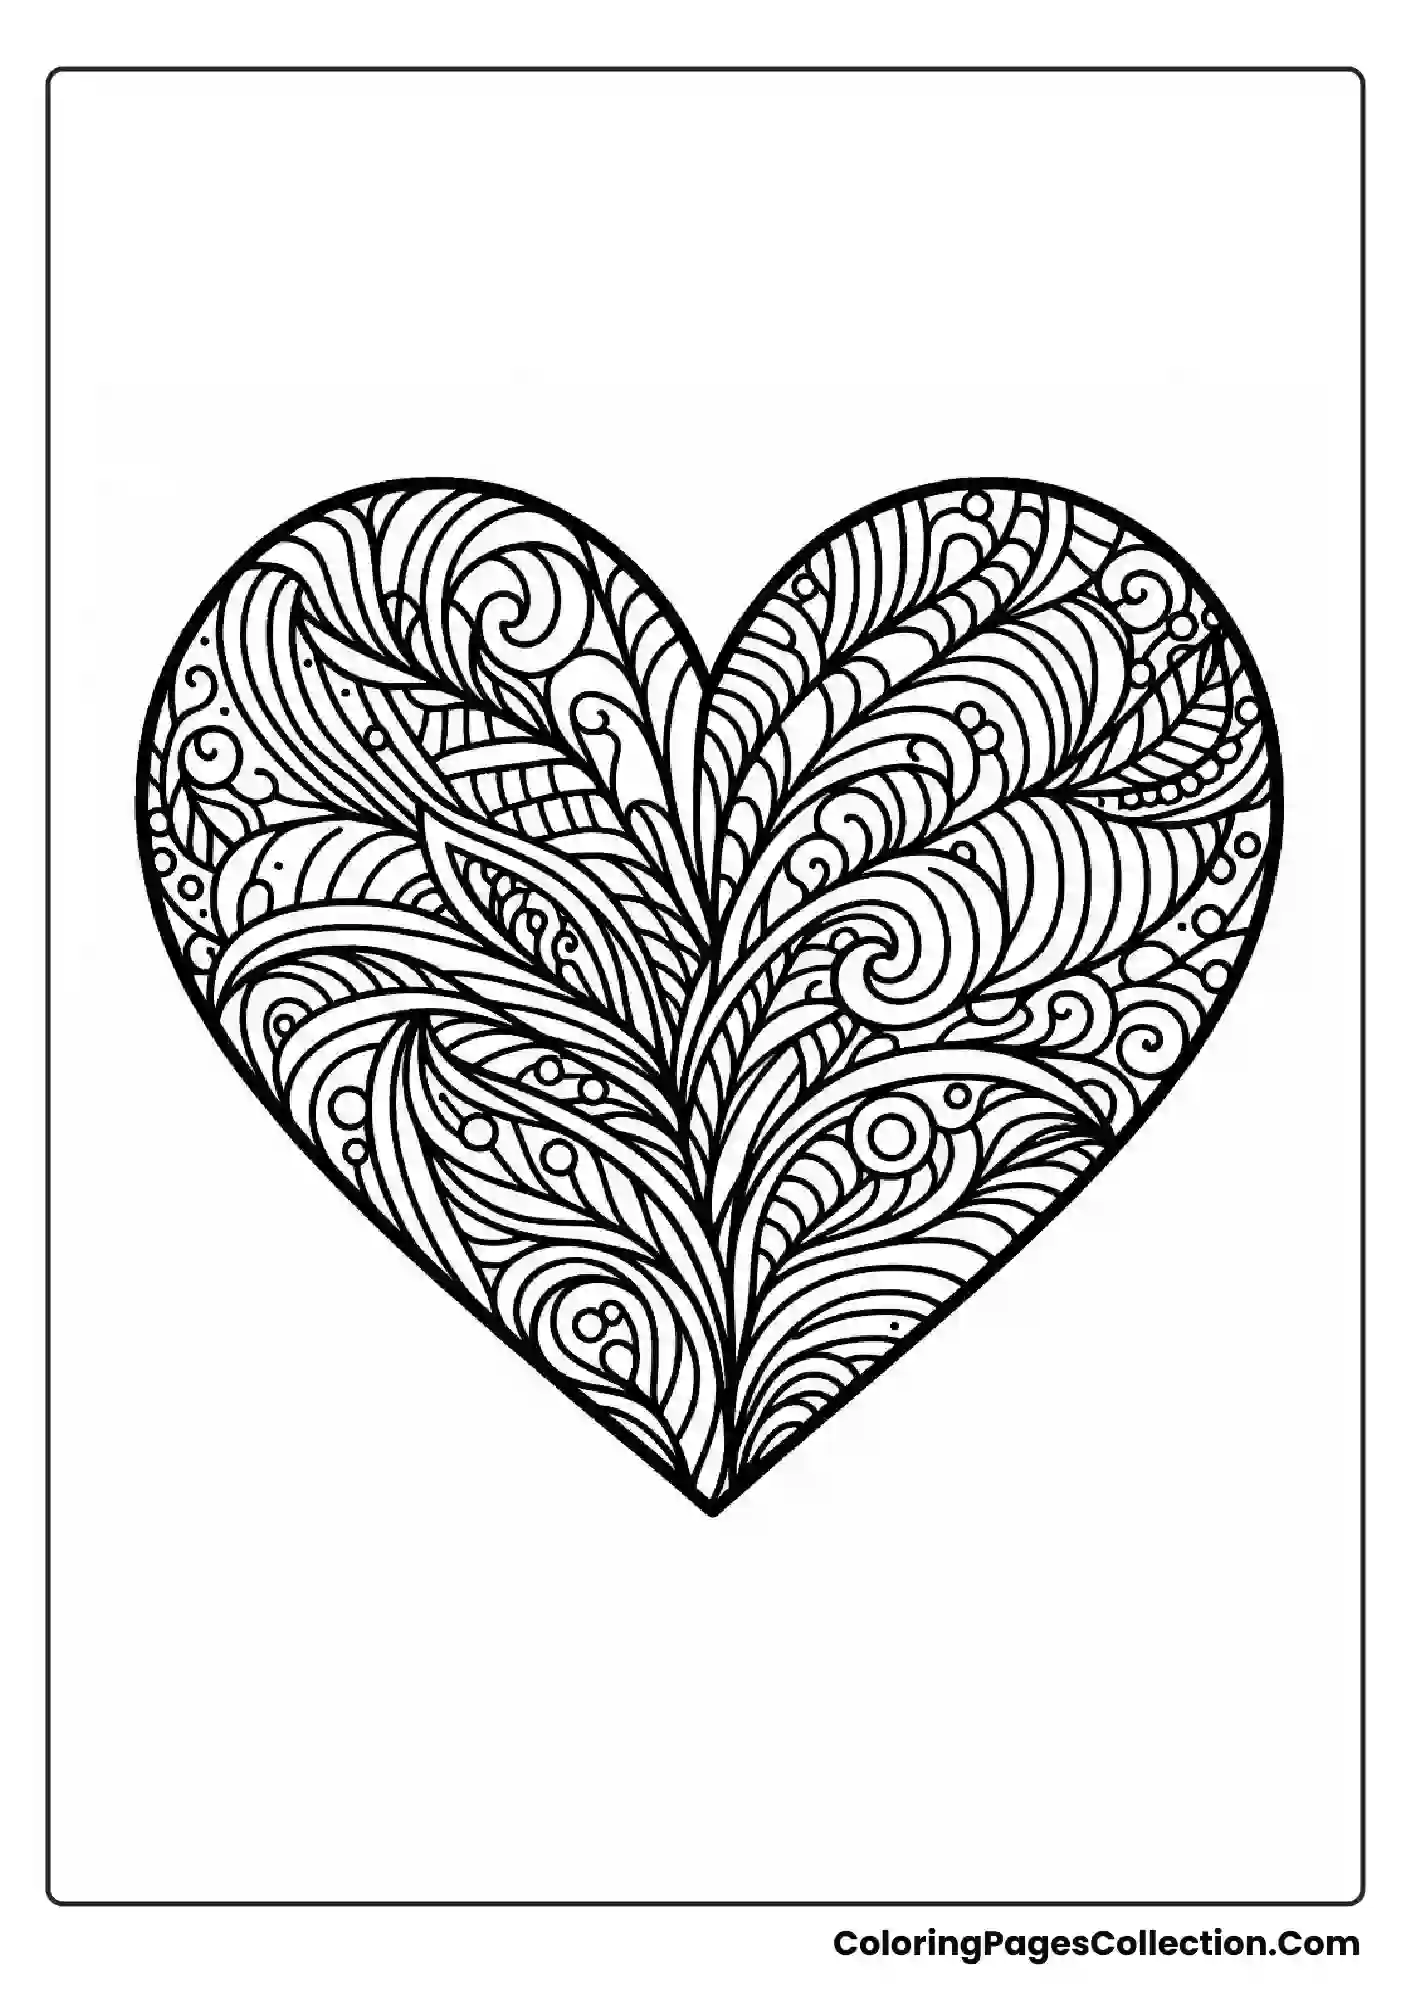 A Very Large, Simple Heart Outline